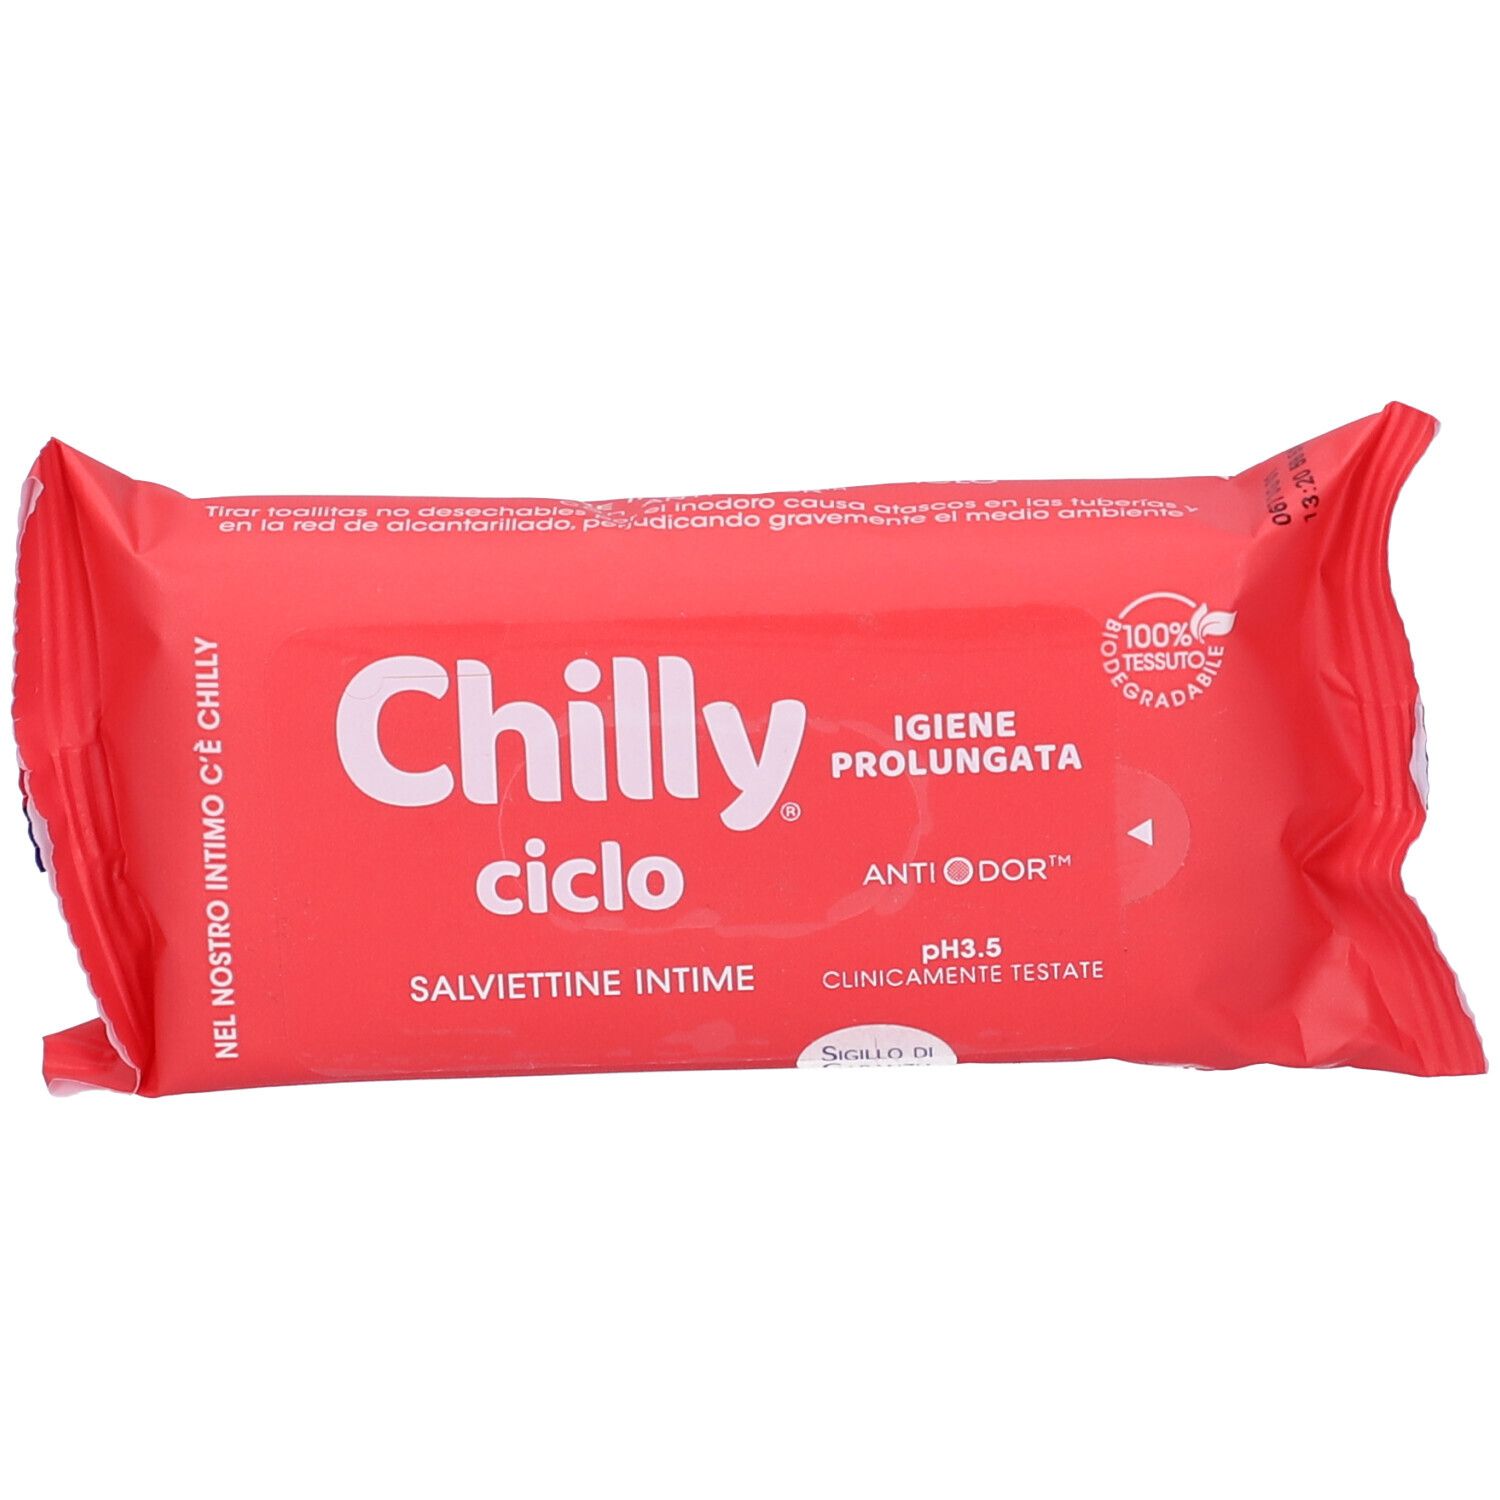 Chilly® Ciclo